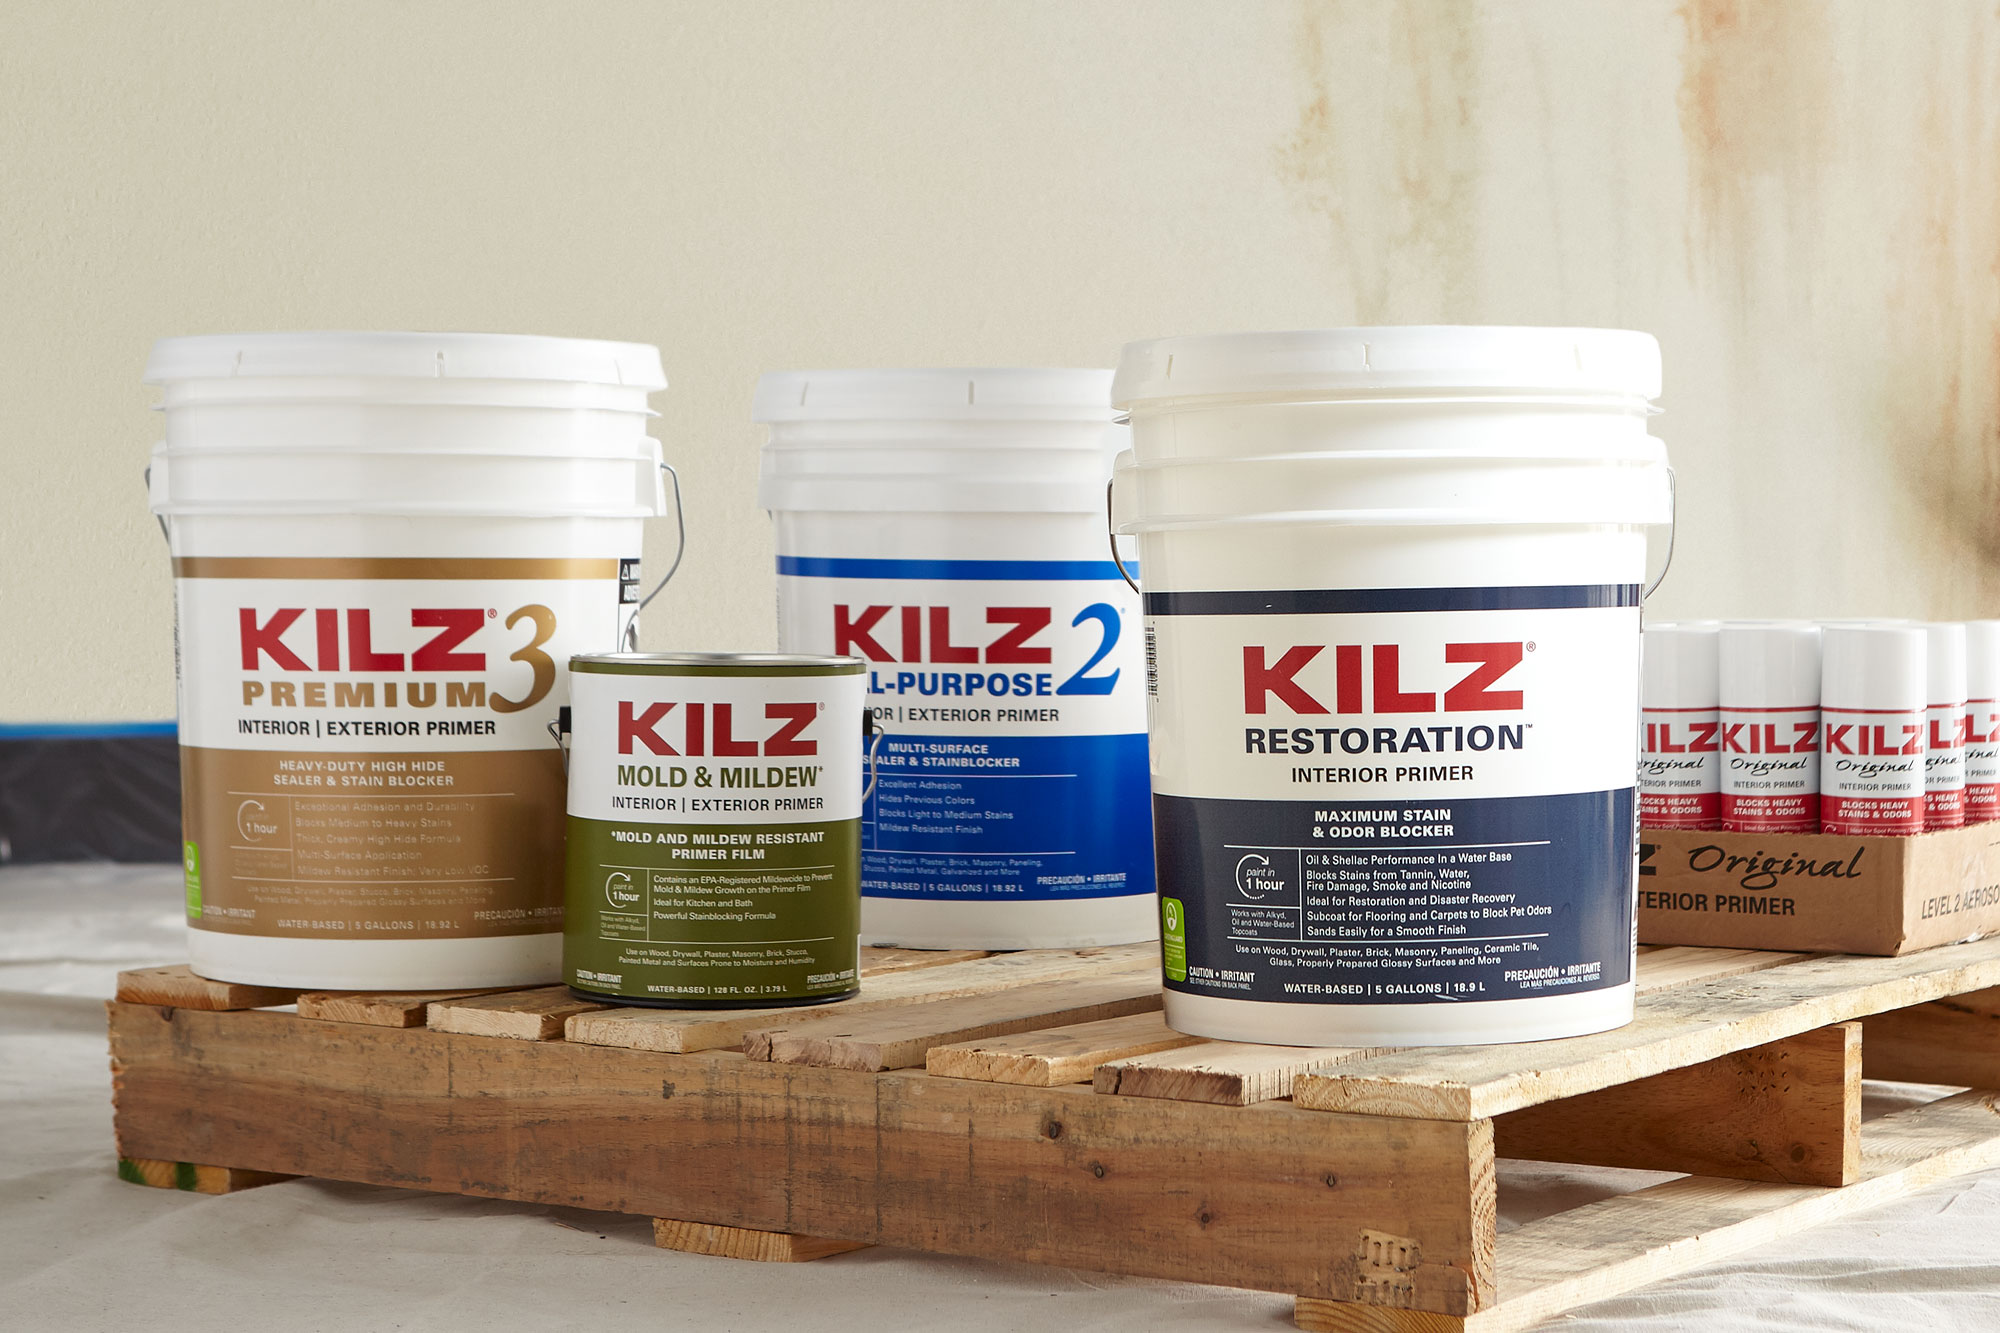 Image of a variety of KILZ Primer cans and gallons